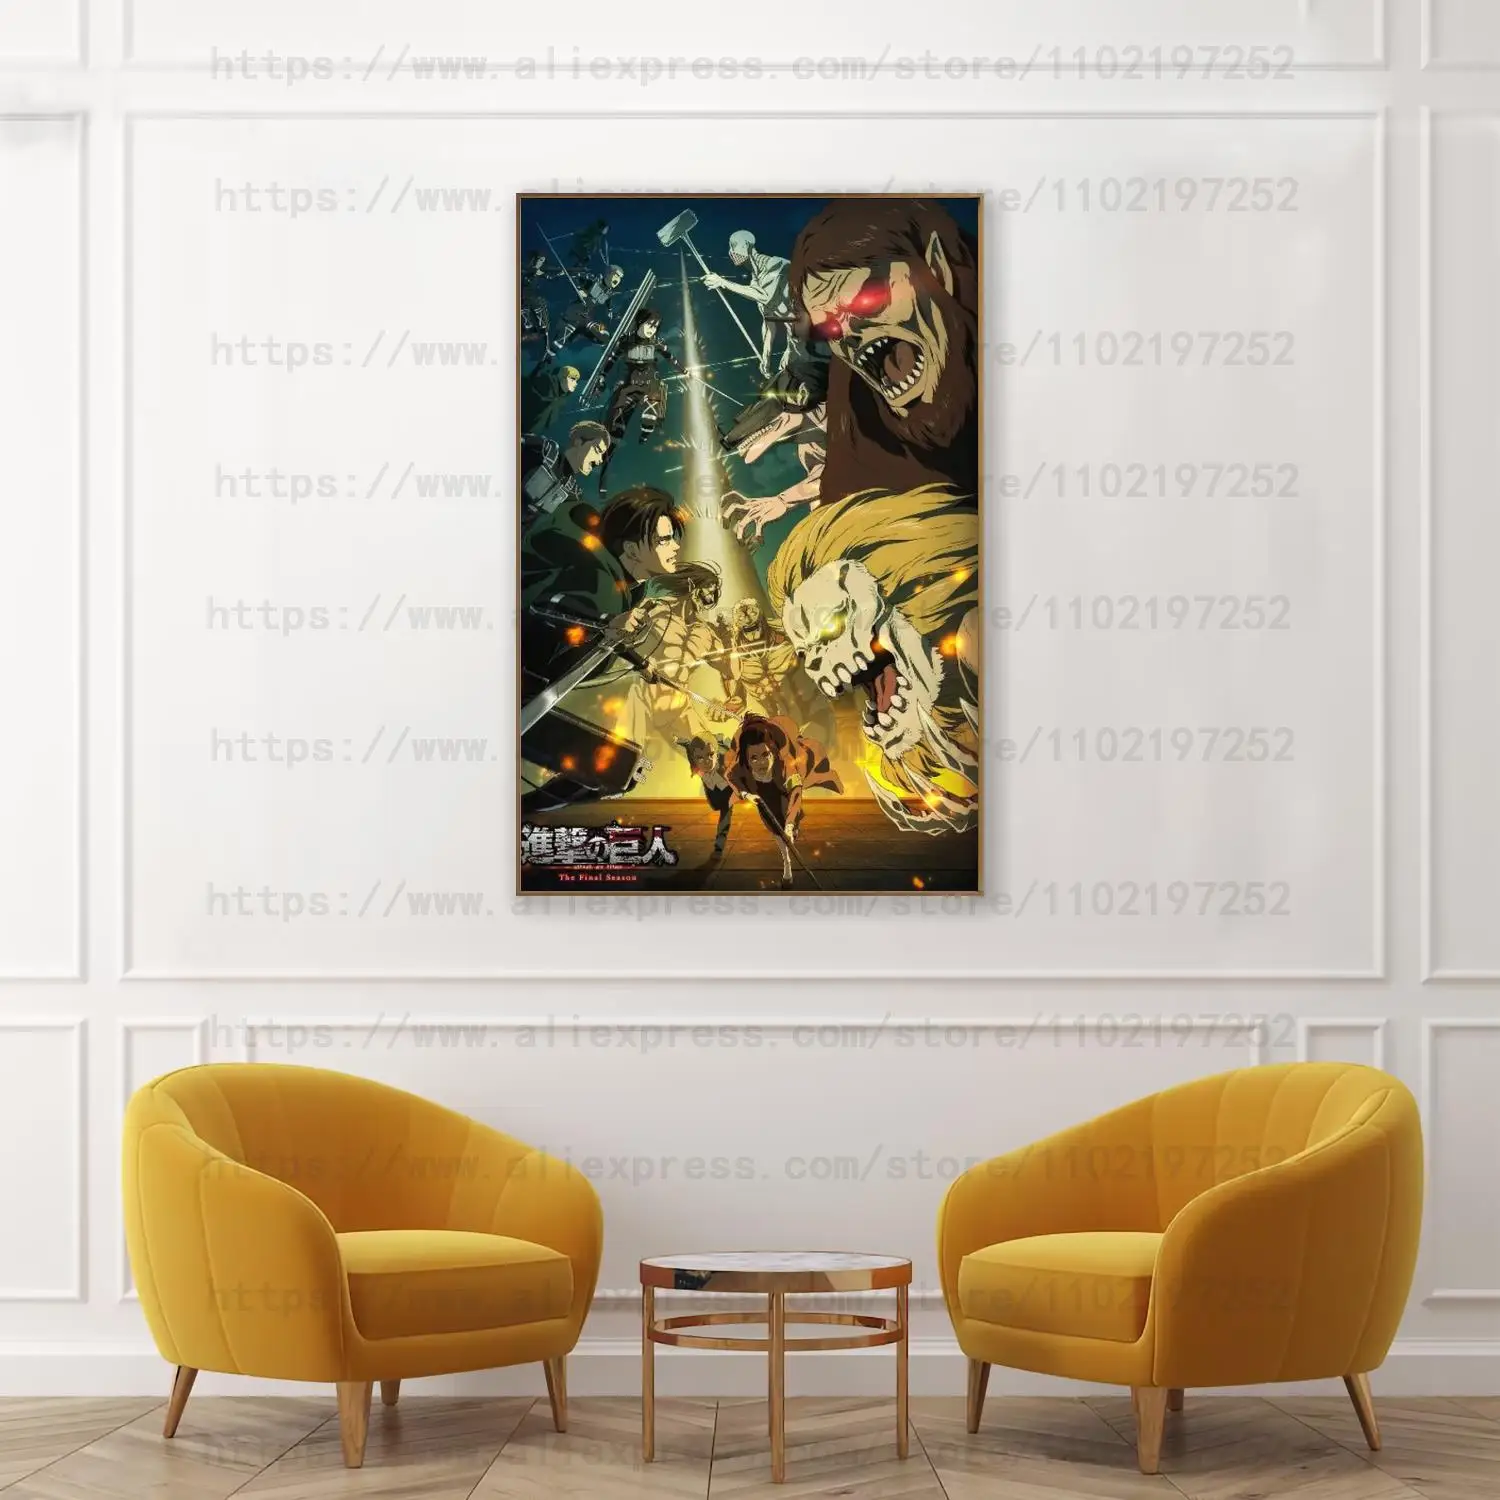 Eren Attack on Titan Anime Decorative Painting Living Room Wall Art Canvas Poster